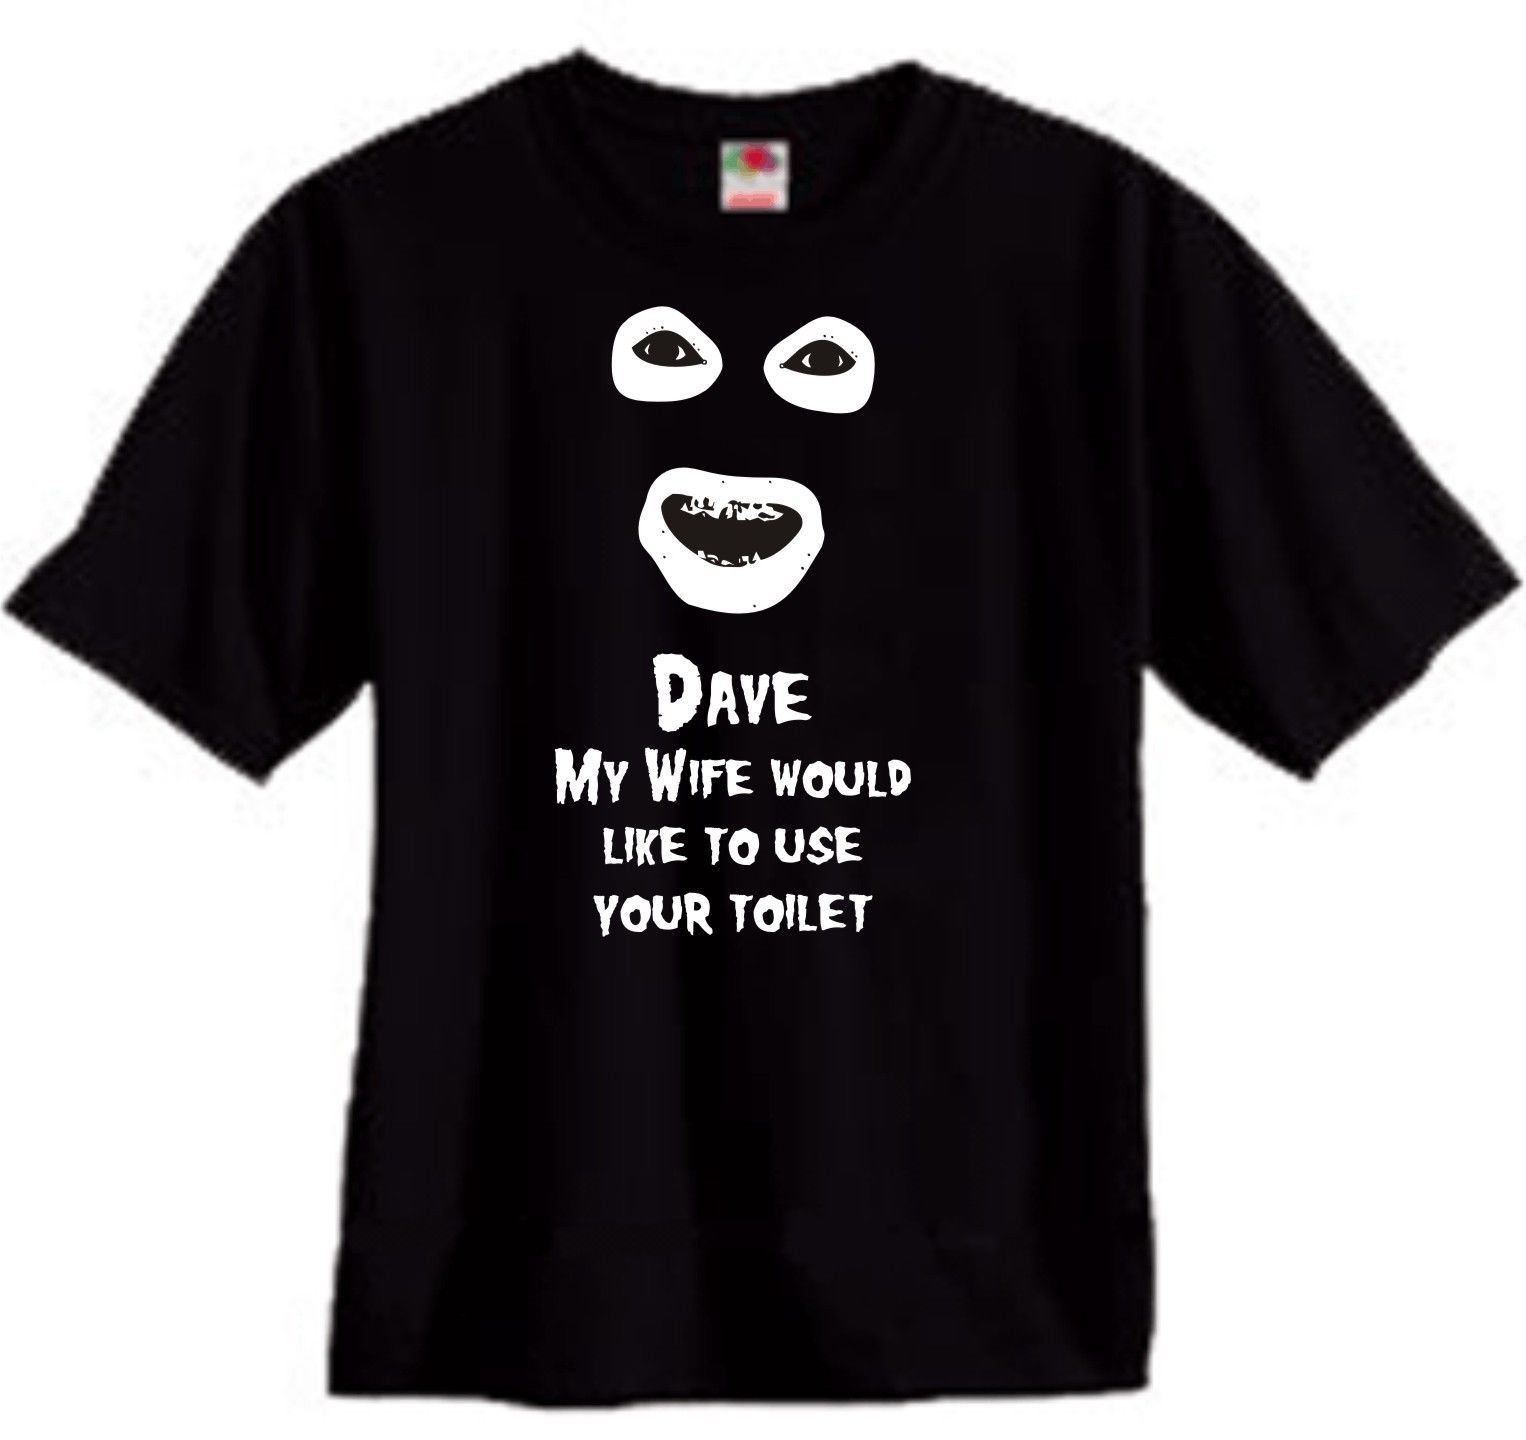 Dave my wife would like to use your toilet